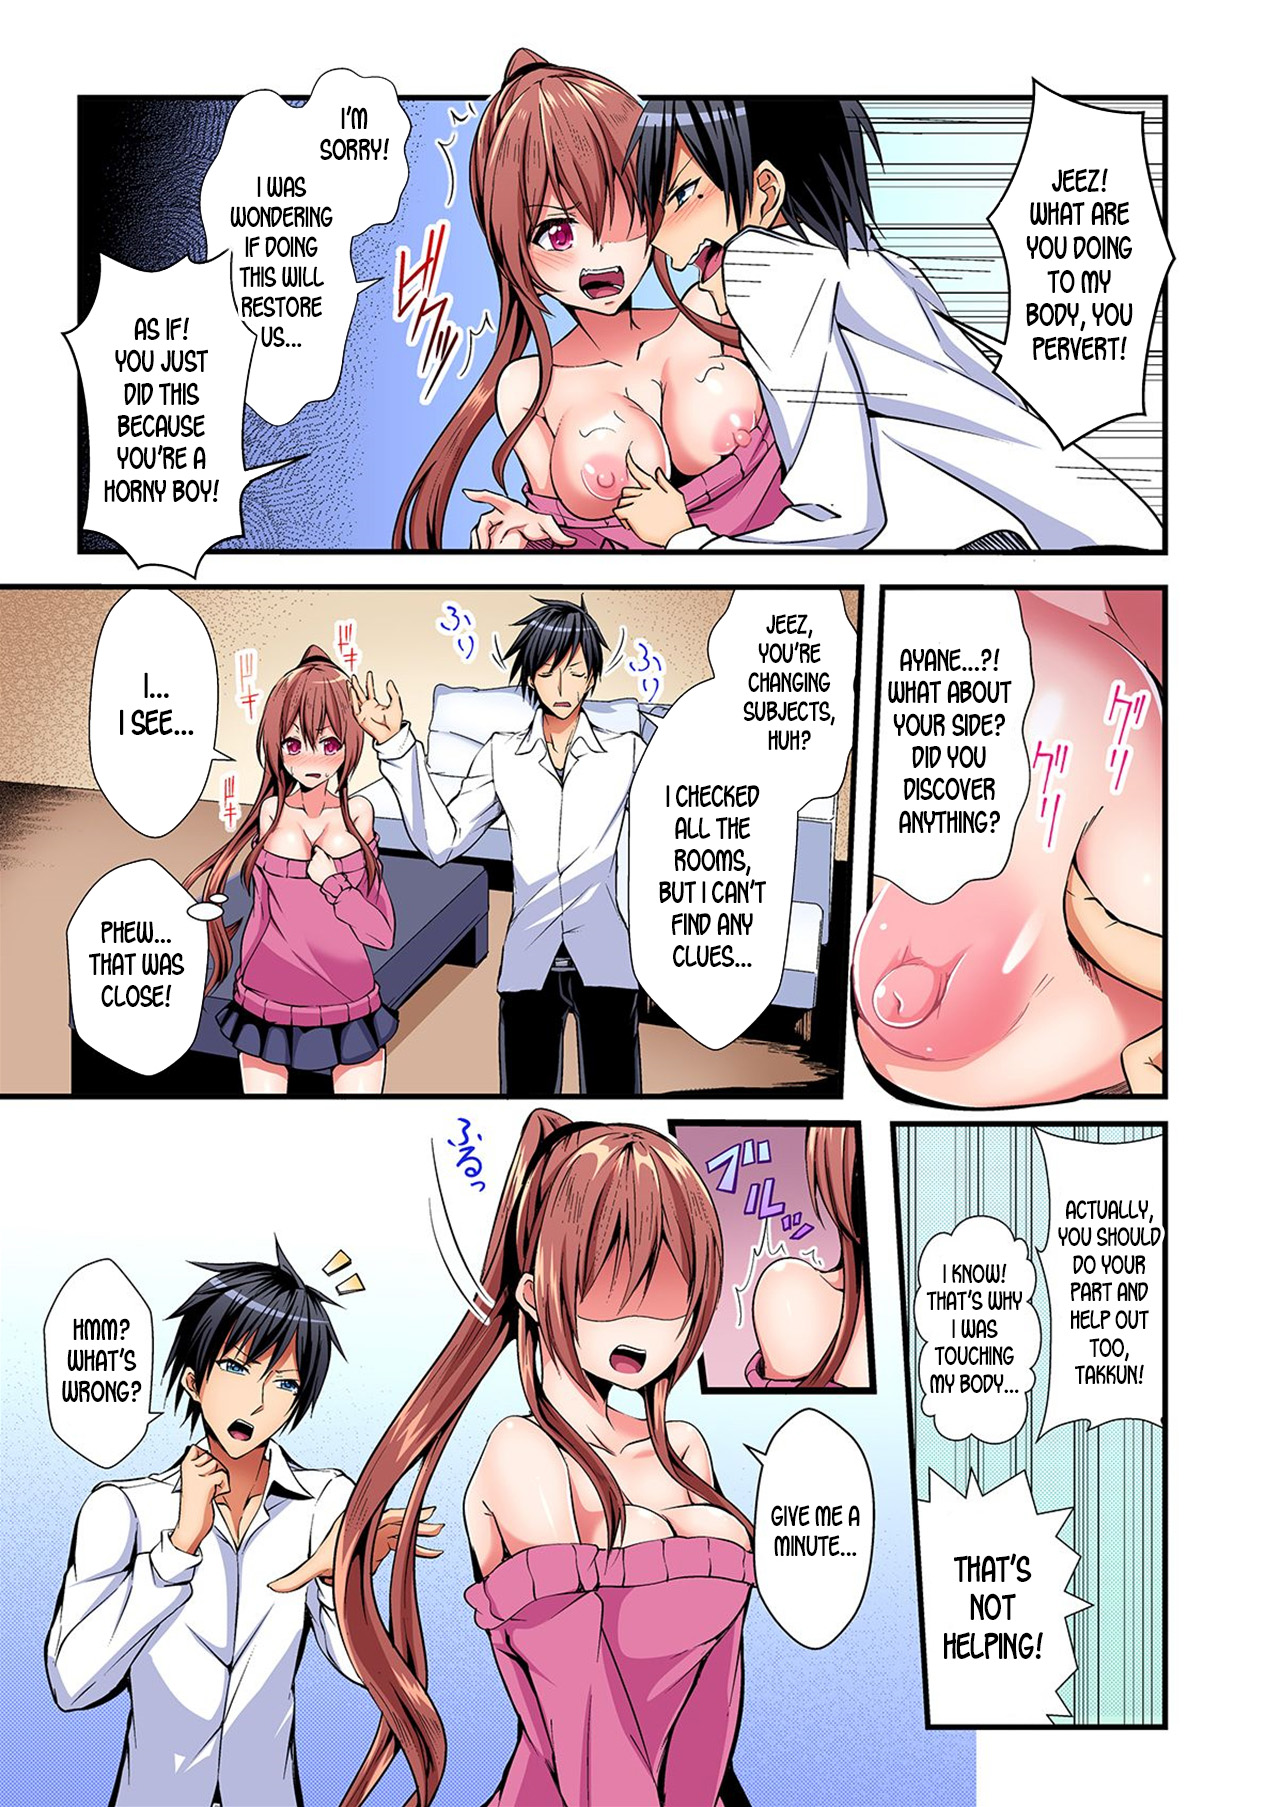 [Suishin Tenra] Switch bodies and have noisy sex! I can't stand Ayanee's sensitive body ch.1-2 [desudesu] page 12 full